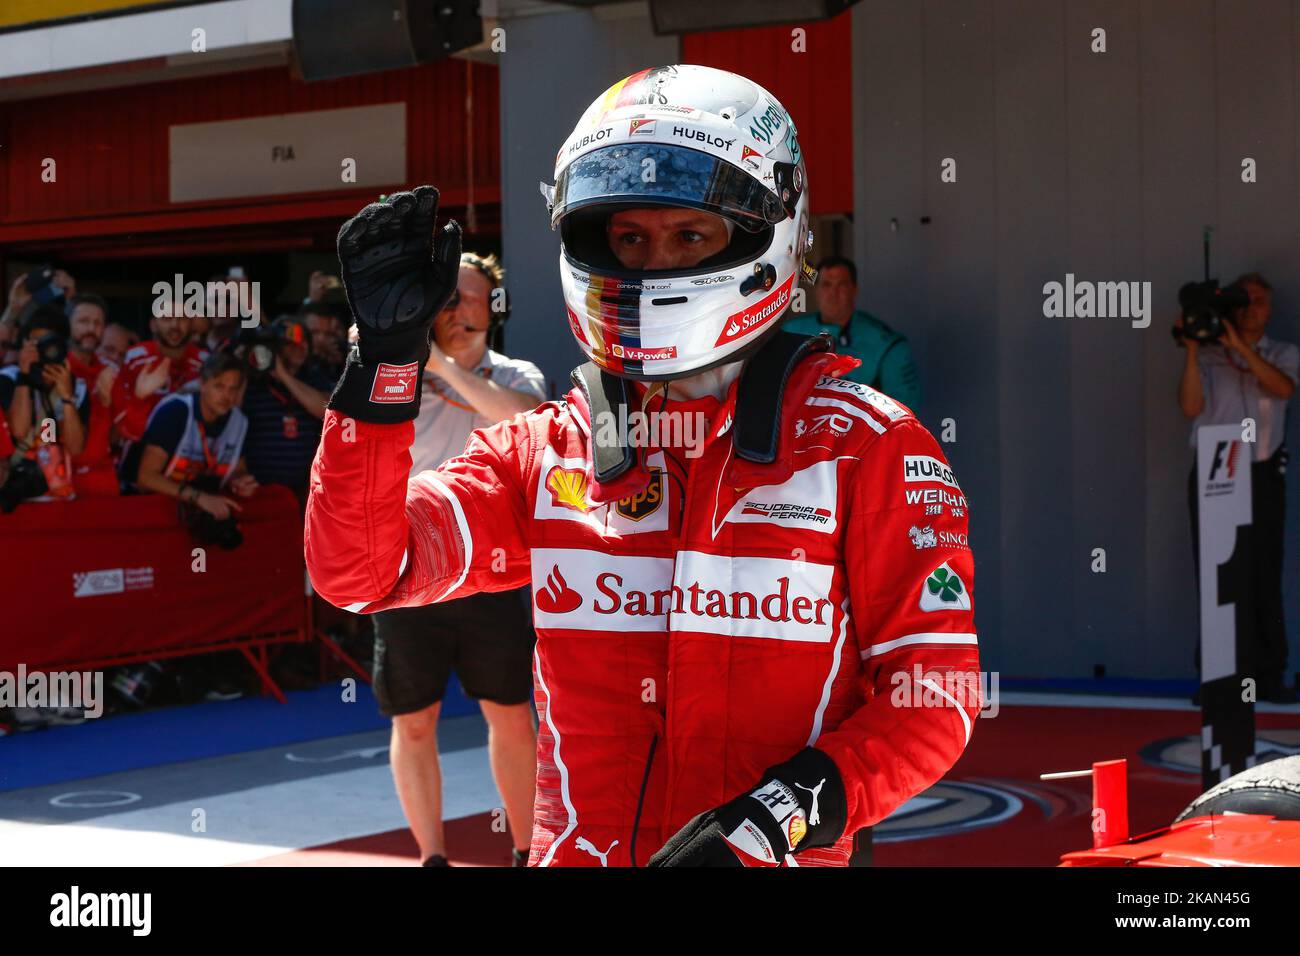 Sebastian Vettel, team Ferrari celebrates the second place during the Formula One GP of Spain 2017 celebrated at Circuit Barcelona Catalunuya on 14th May 2017 in Barcelona, Spain. (Photo by Urbanandsport/NurPhoto) *** Please Use Credit from Credit Field *** Stock Photo